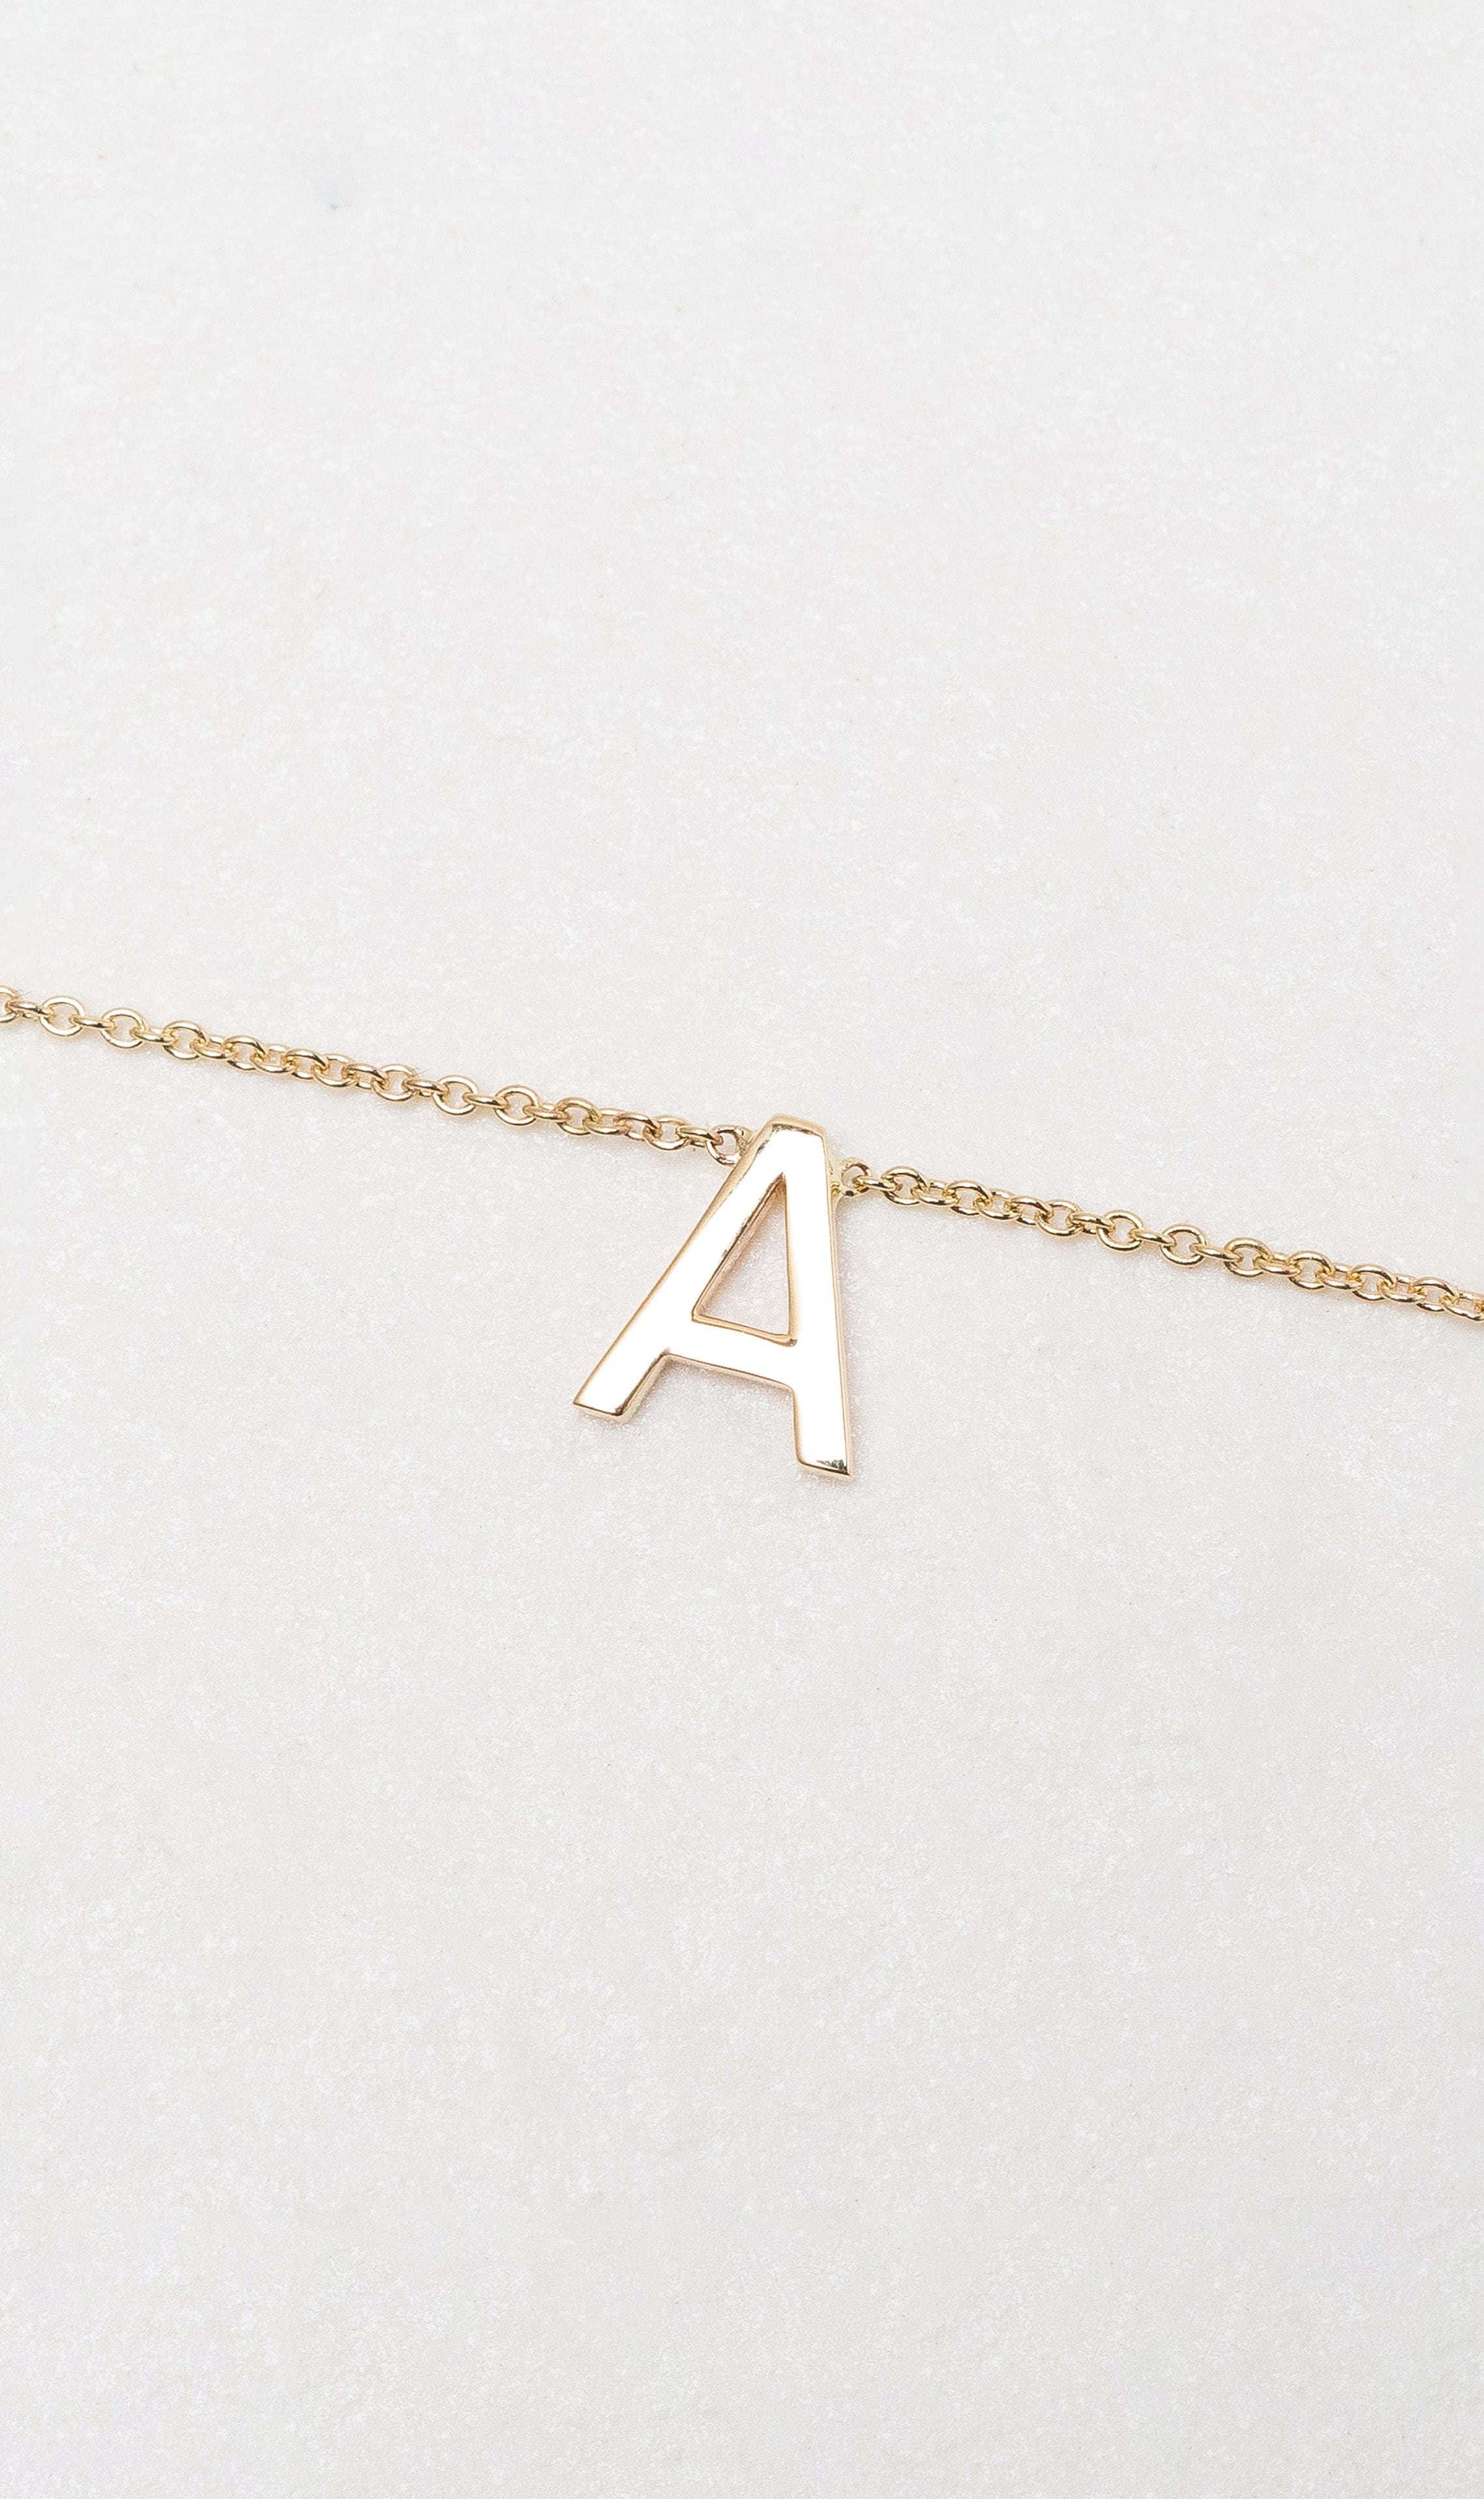 Hogans Family Jewellers 9K Initial Necklace